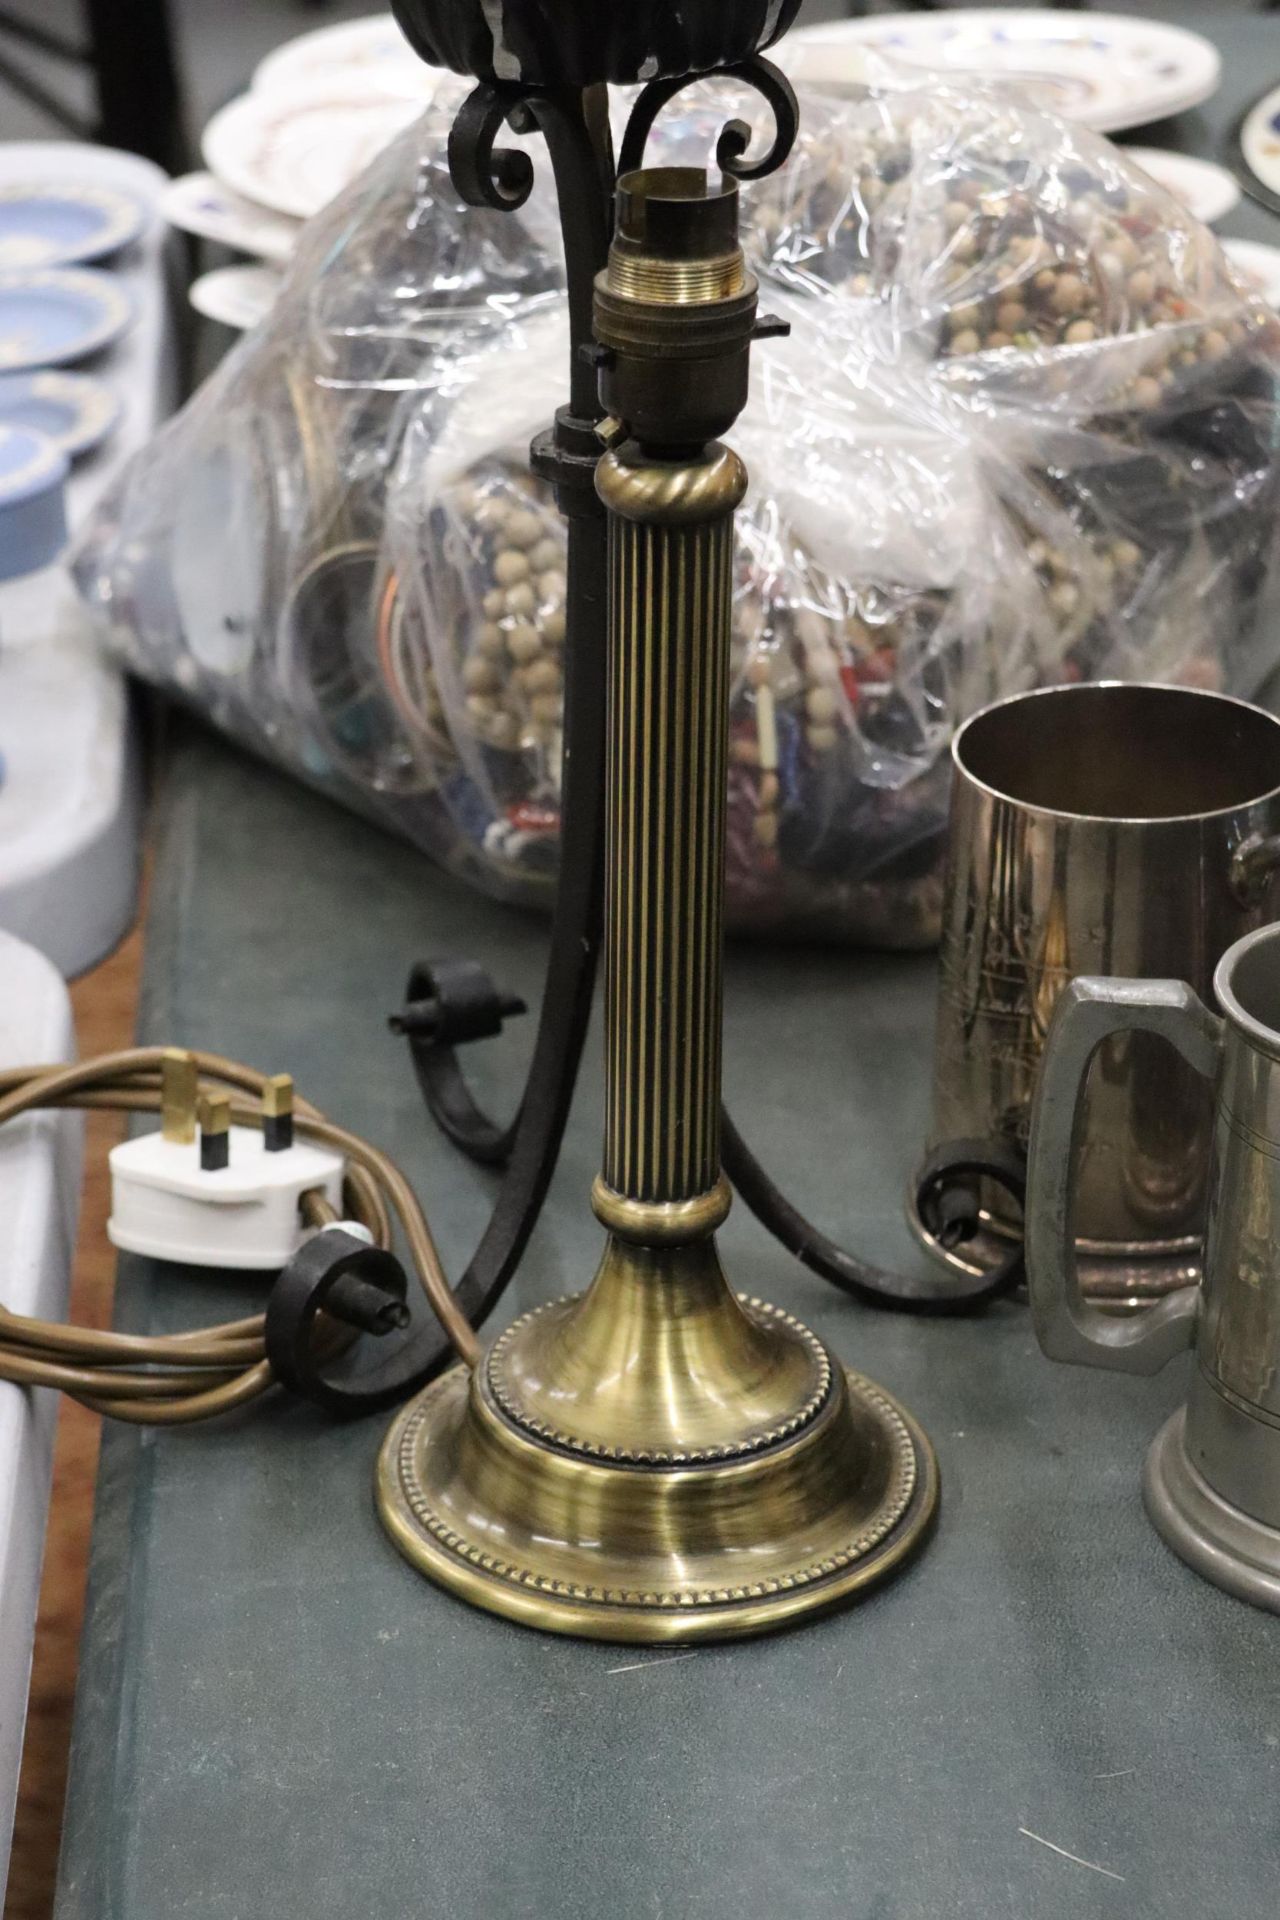 TWO TABLE LAMPS TO INCLUDE ONE WITH BRASS COLUMN BASE AND A CAST METAL ONE - Image 3 of 8